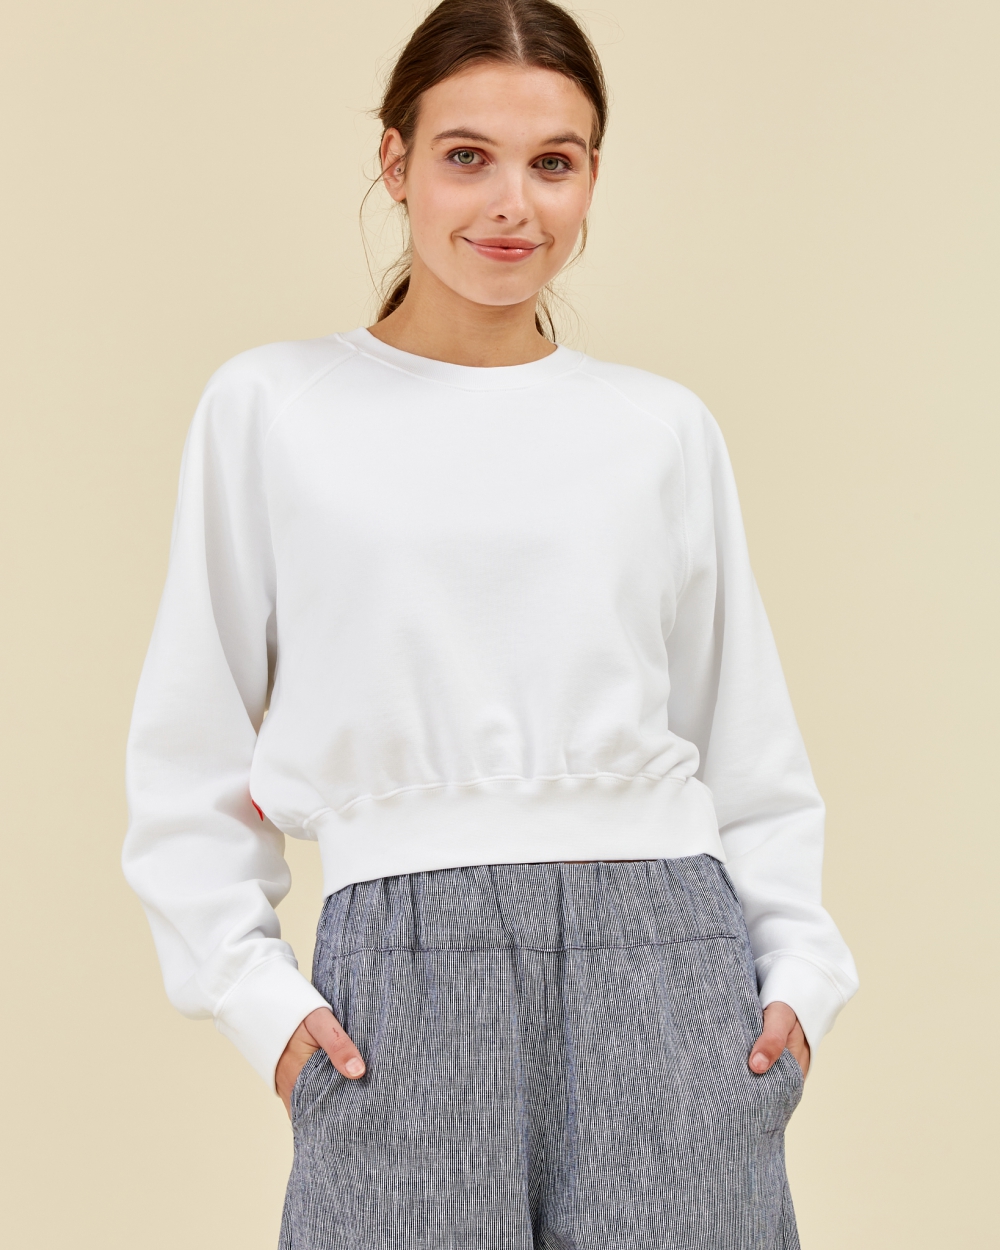 https://www.seamehappy.be/wp-content/uploads/2023/01/Sea-Me-Happy-Mika-Cropped-Sweater-white-front2.jpg